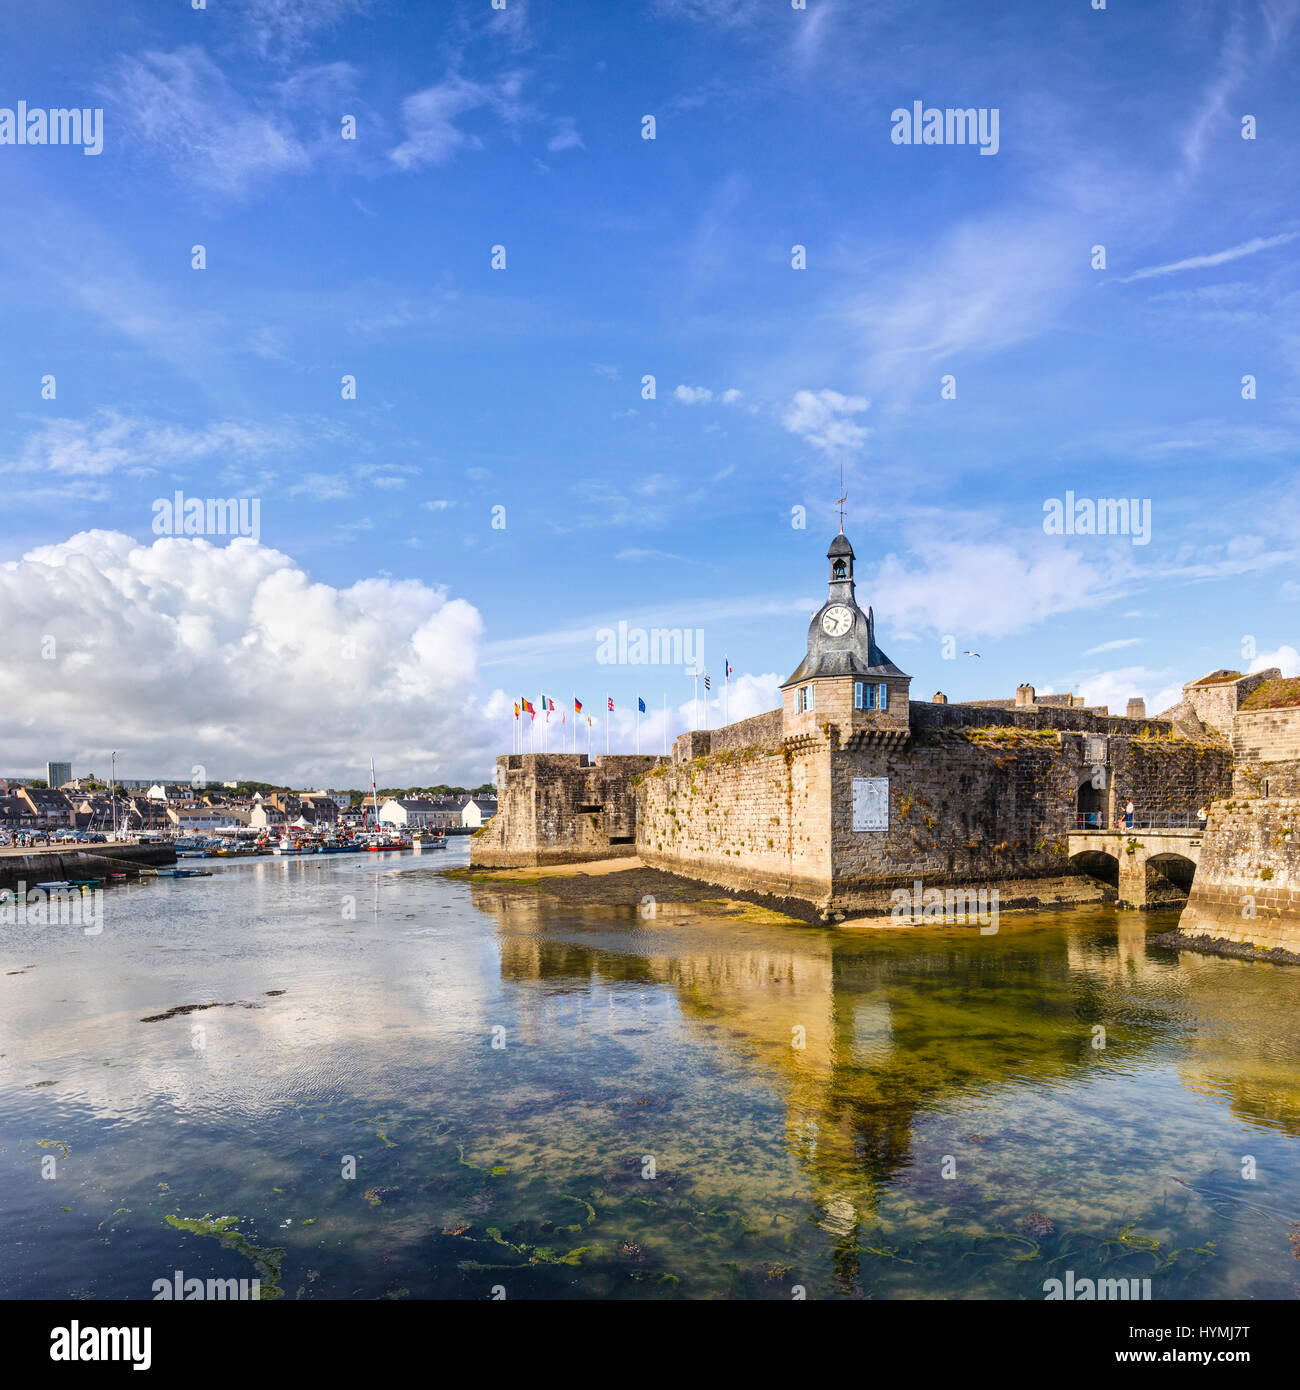 The main entrance of the old walled town or Ville Close of Concarneau in Brittany, France, with the port in the background. Stock Photo